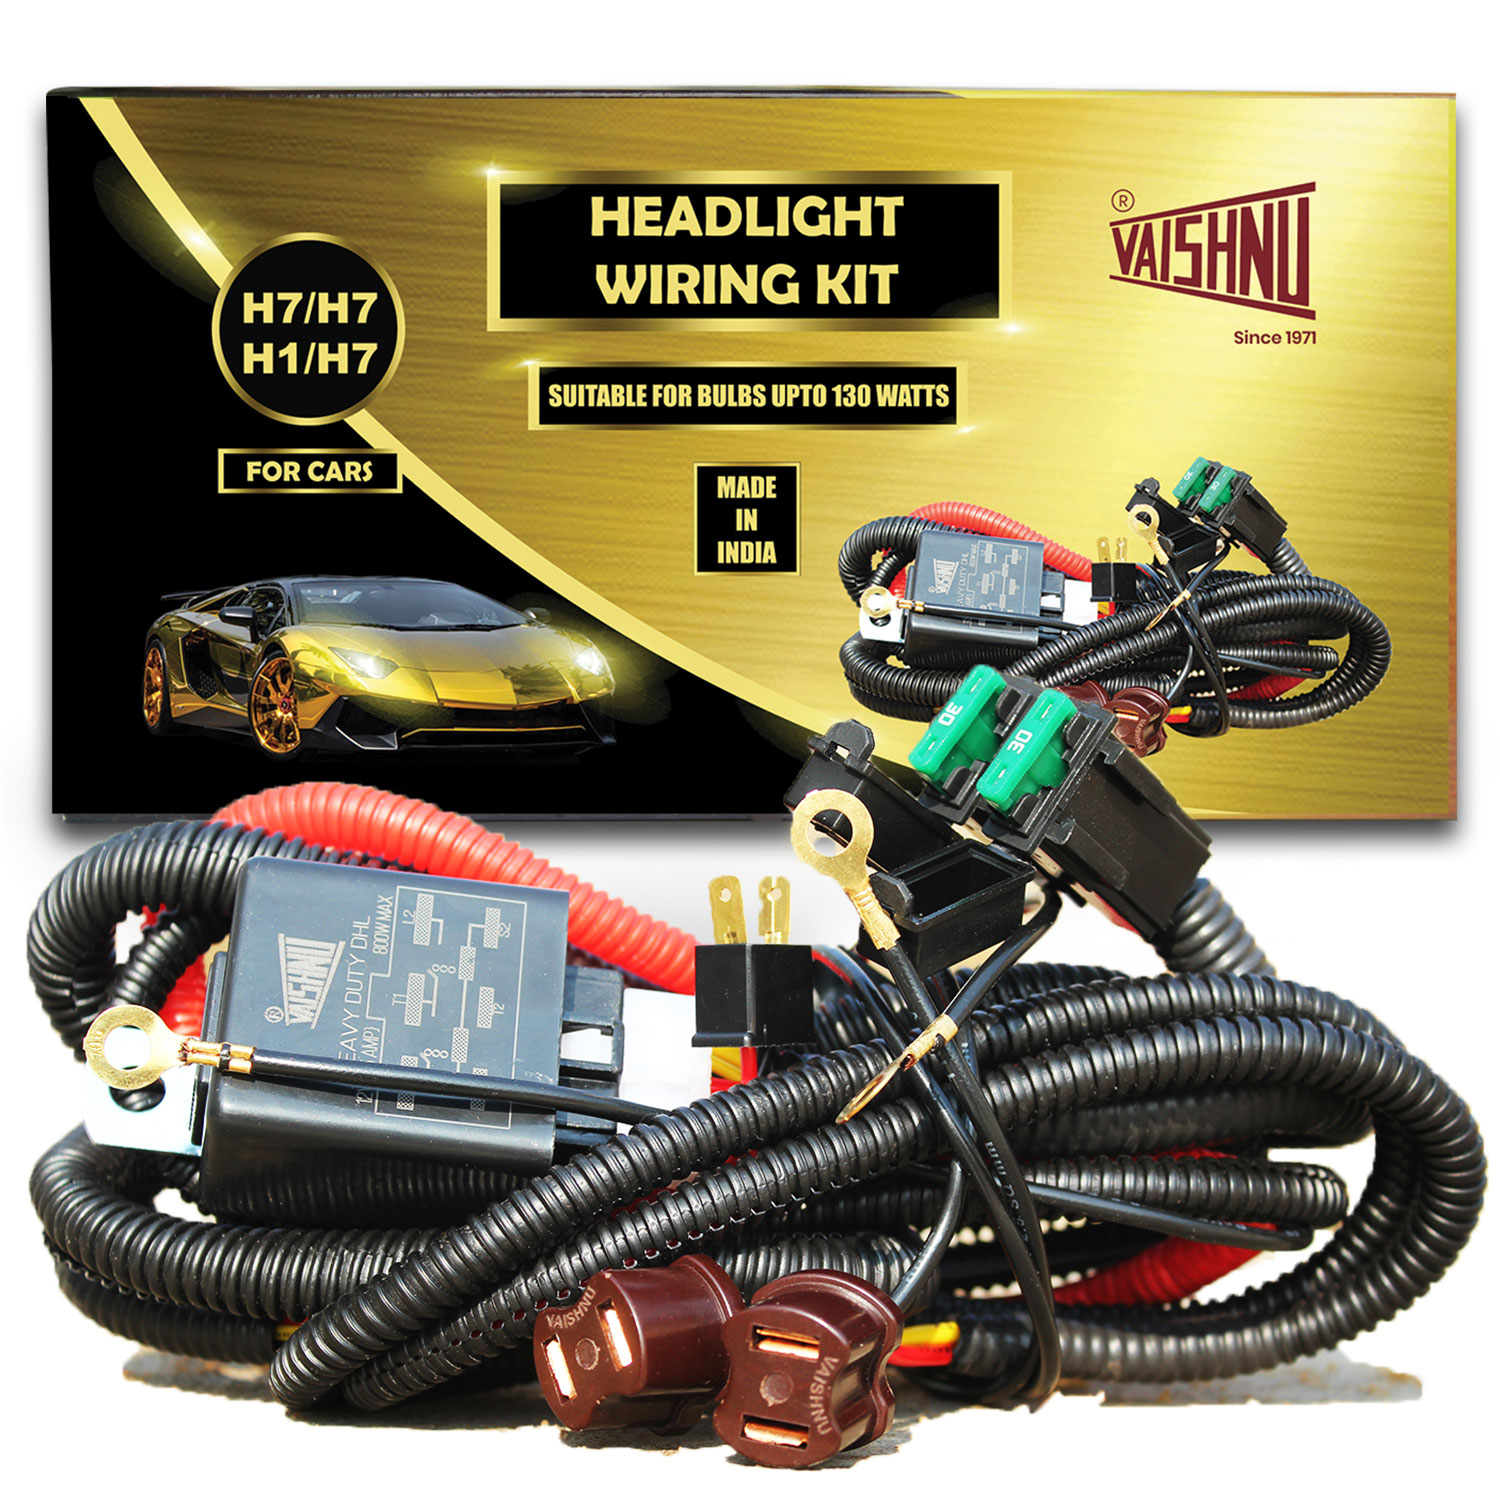 H7 H7 Headlight Wiring Kit for Cars, 1 Year Warranty